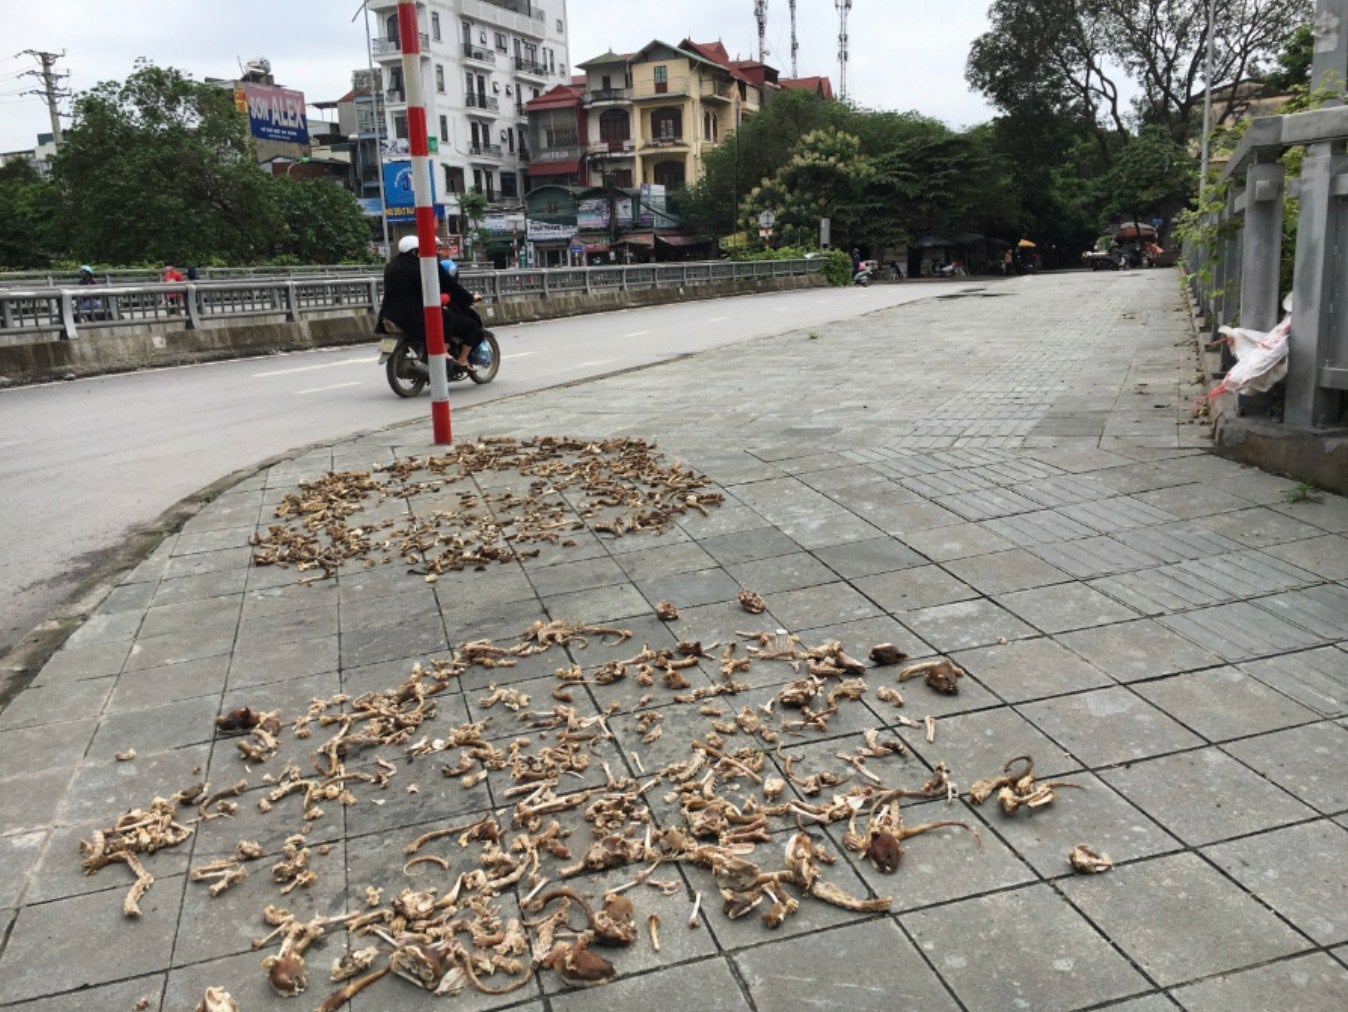 Piles of cat bones spotted on a pavement